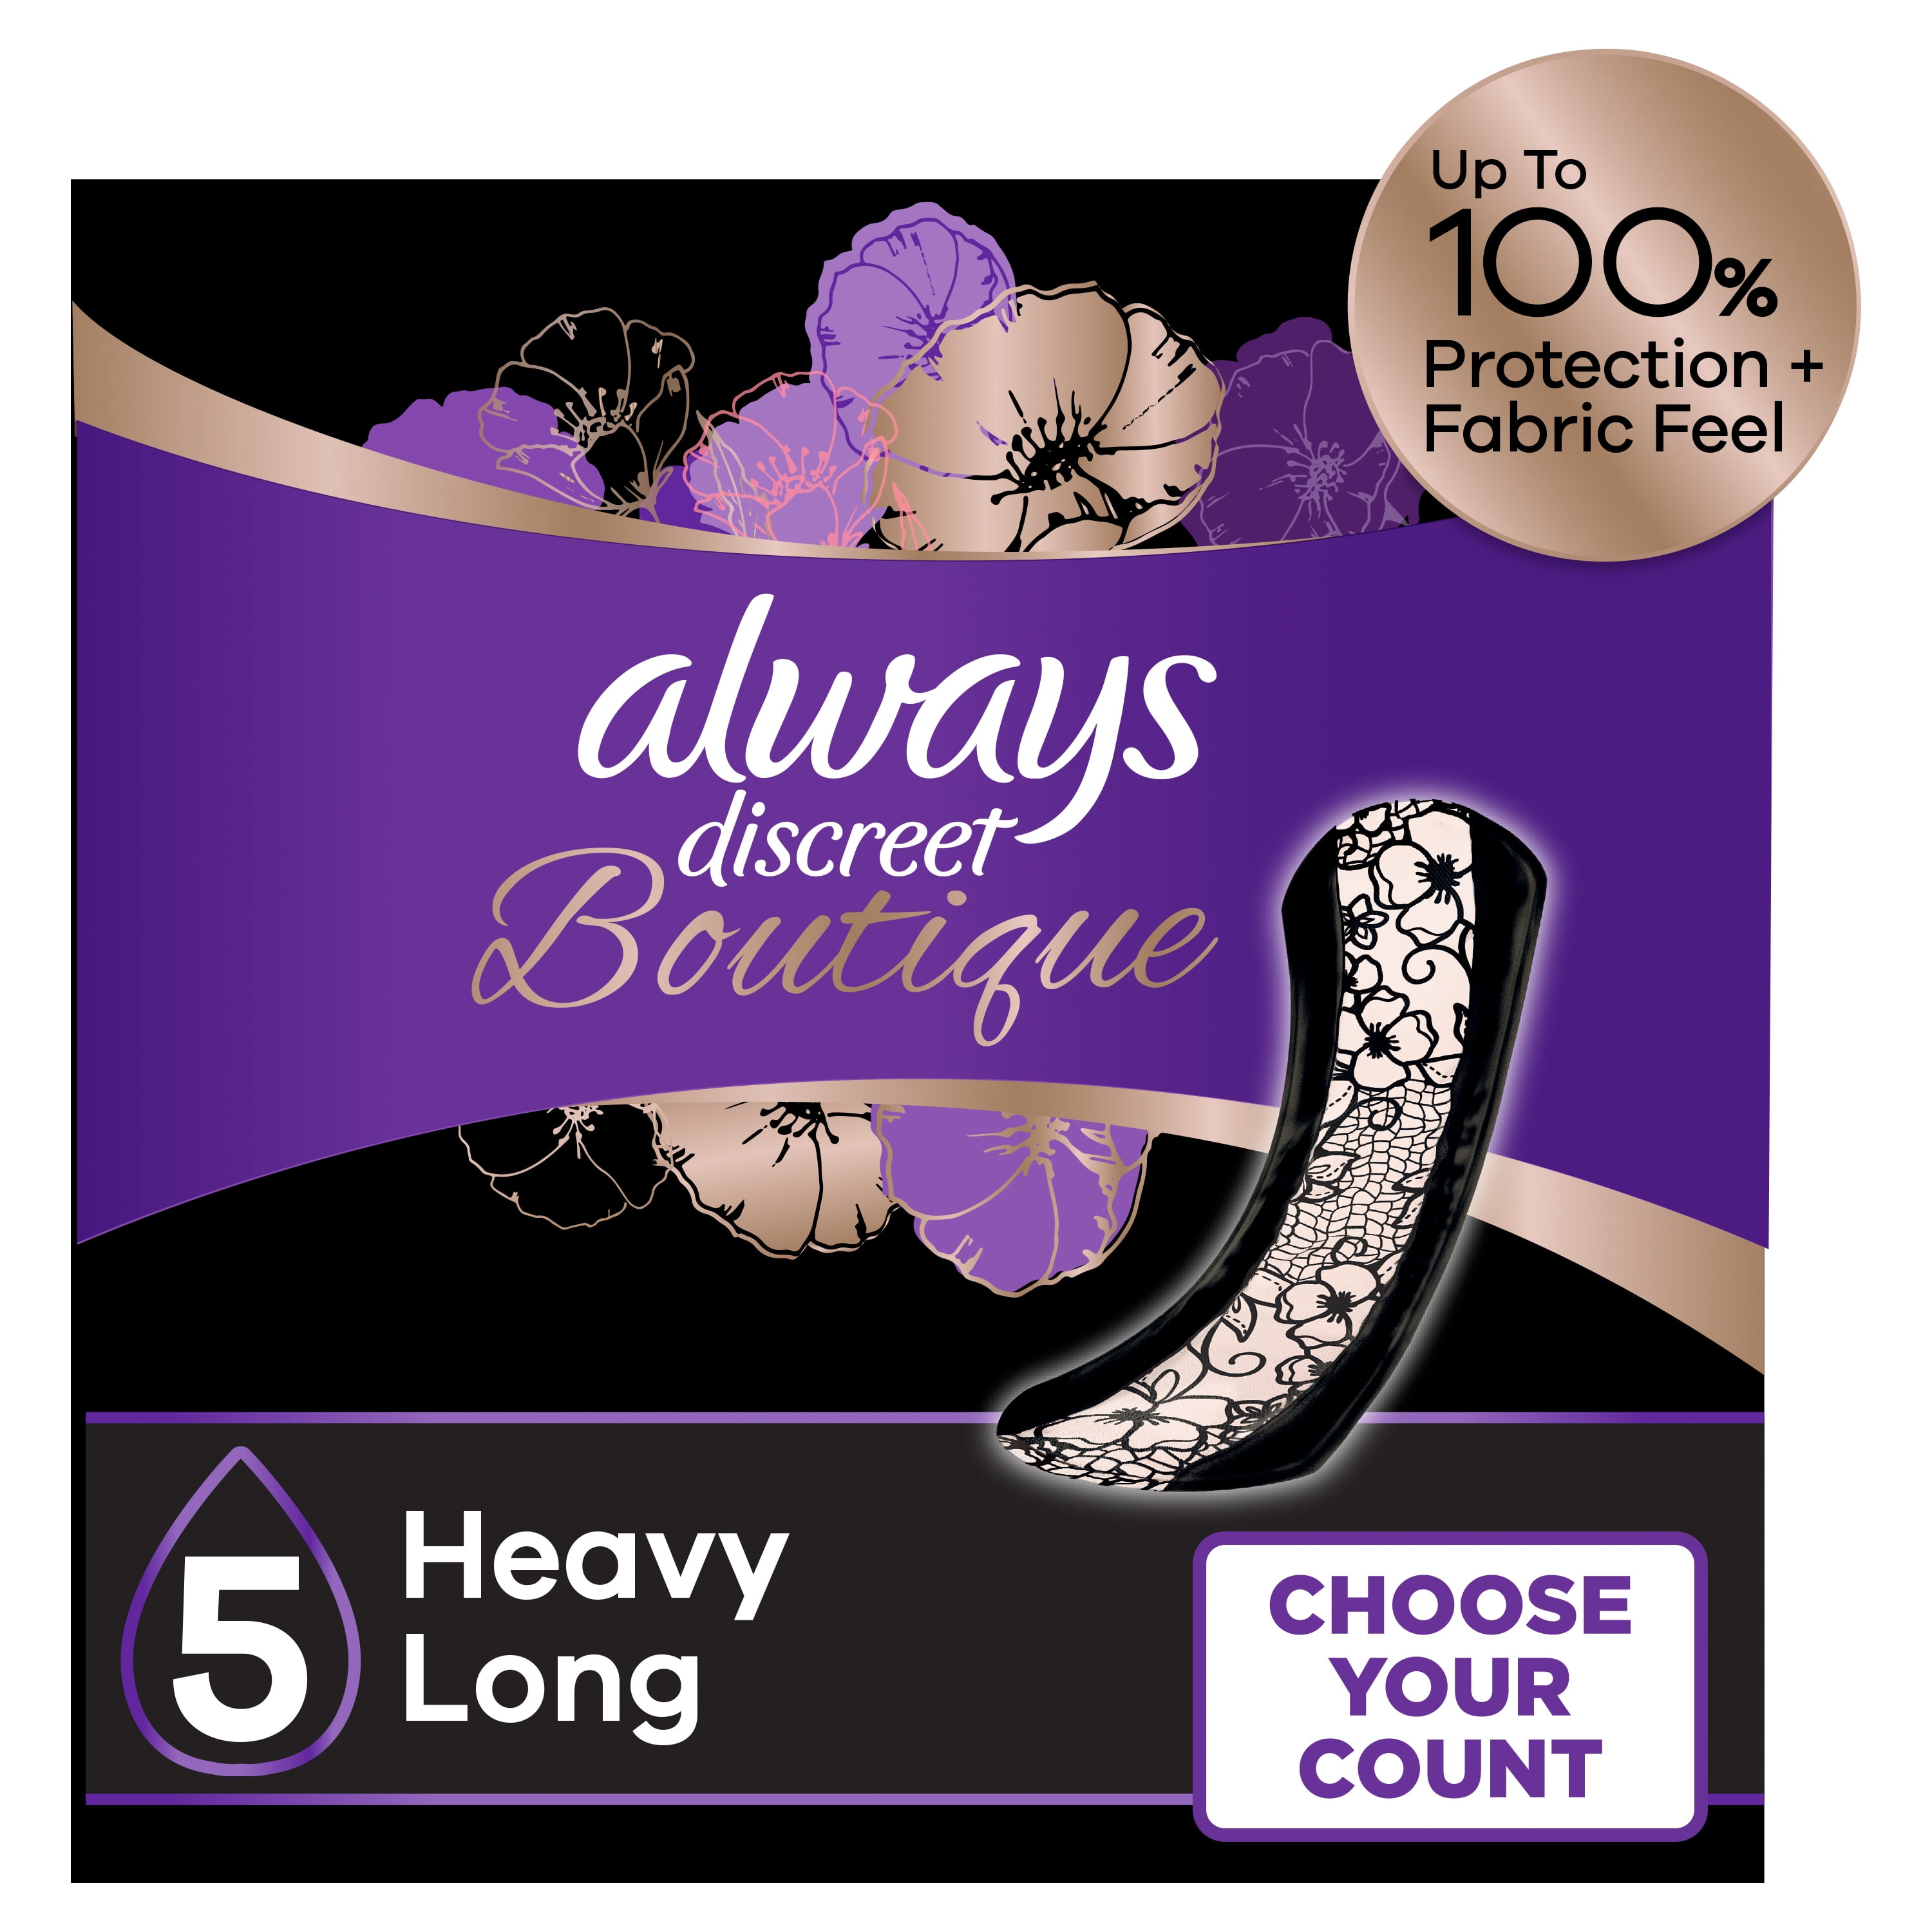 Save on Always Discreet Incontinence Pads 6 Extra Heavy Long Order Online  Delivery